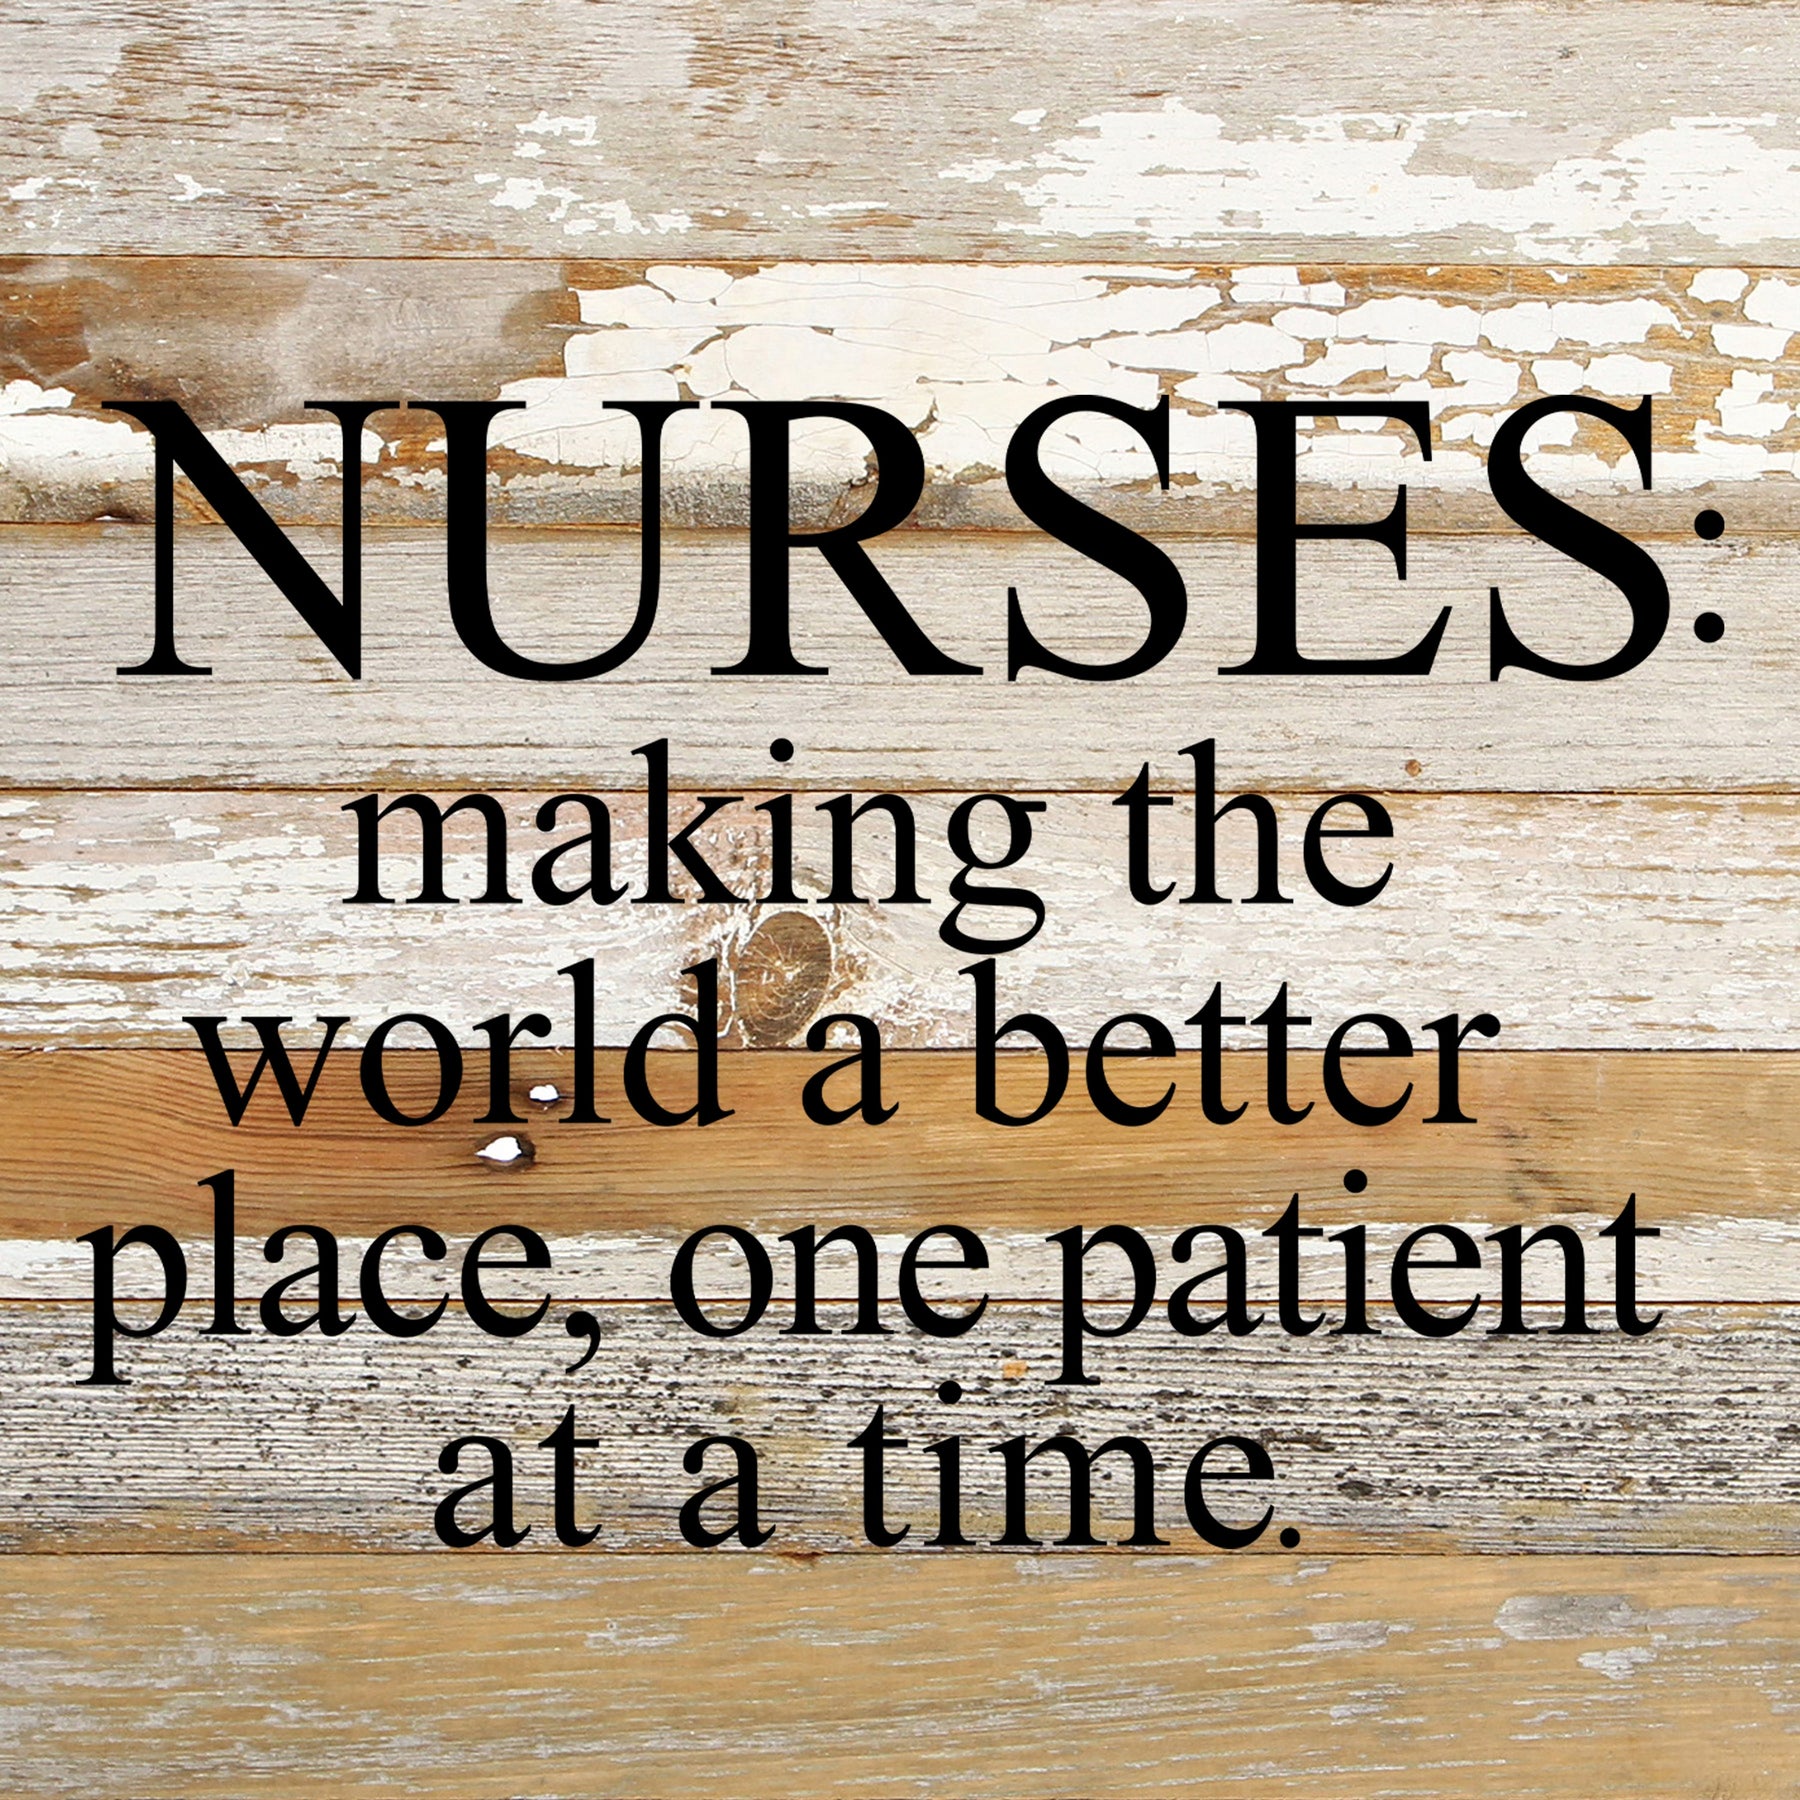 Nurses: making the world a better place, one patient at a time. / 6"x6" Reclaimed Wood Sign